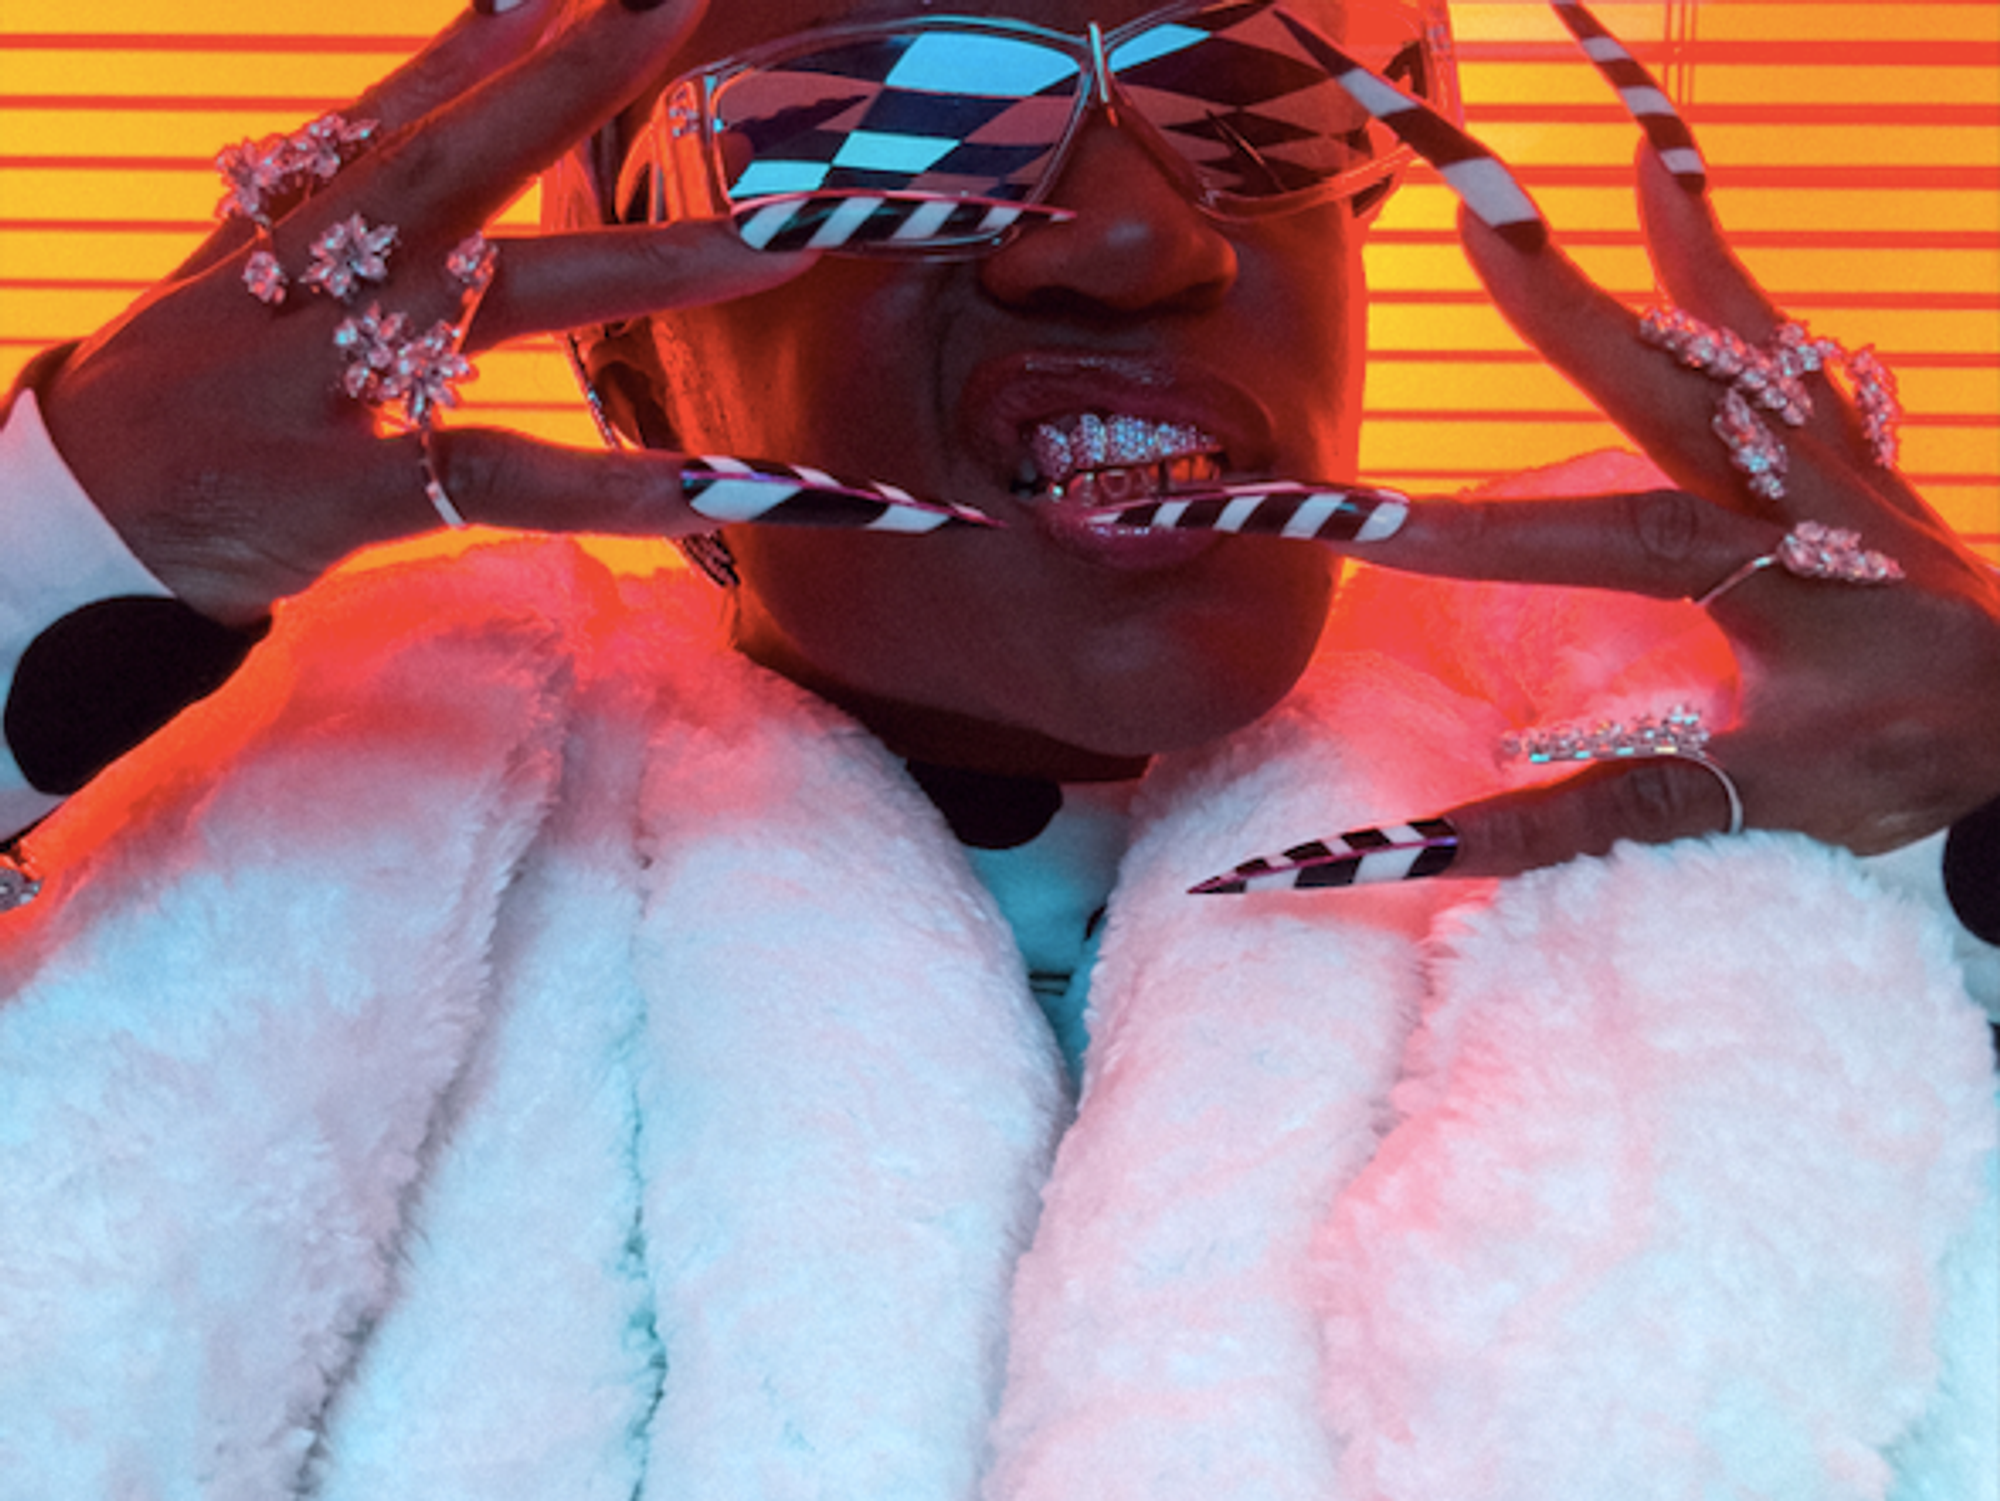 Pictured: Ghanaian singer Amaarae in visuals from the 'SAD GIRLZ LUV MONEY' music video 